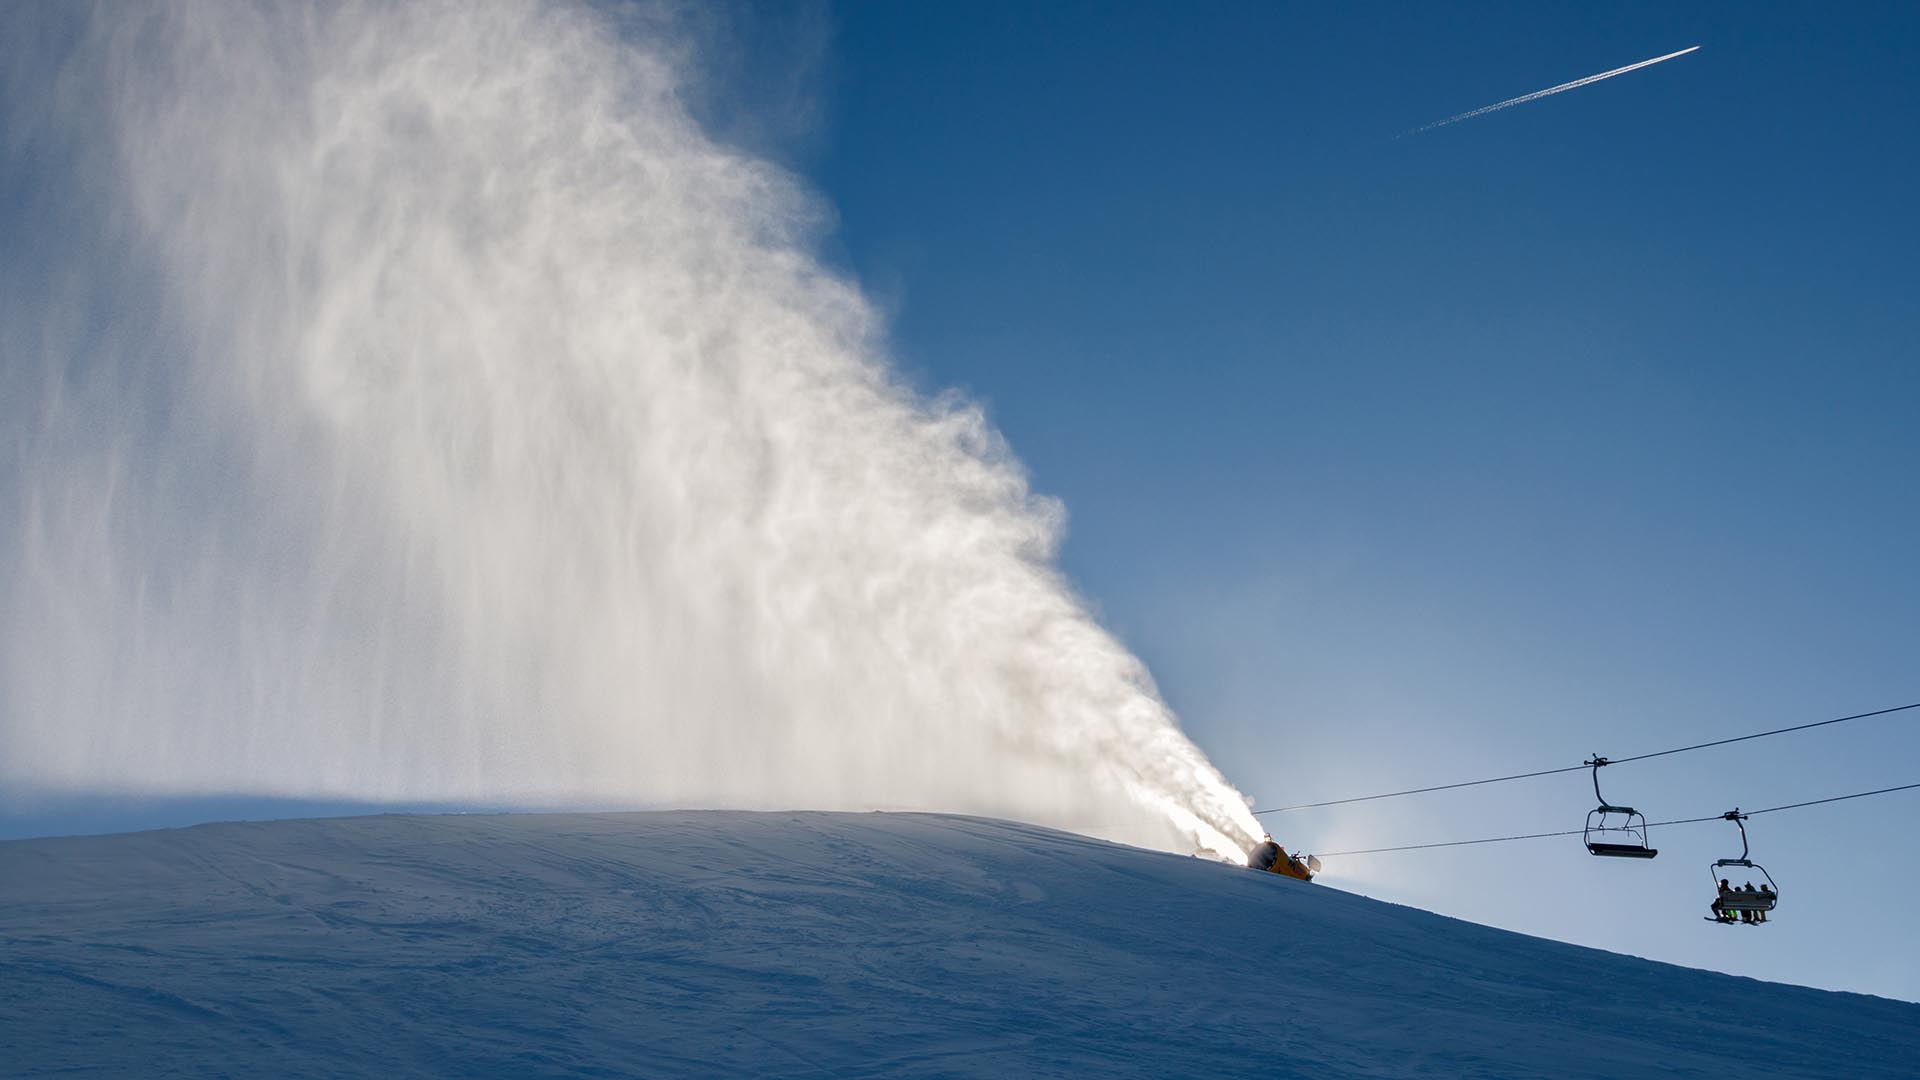 Snowmaking stretches ski season. But is it sustainable?